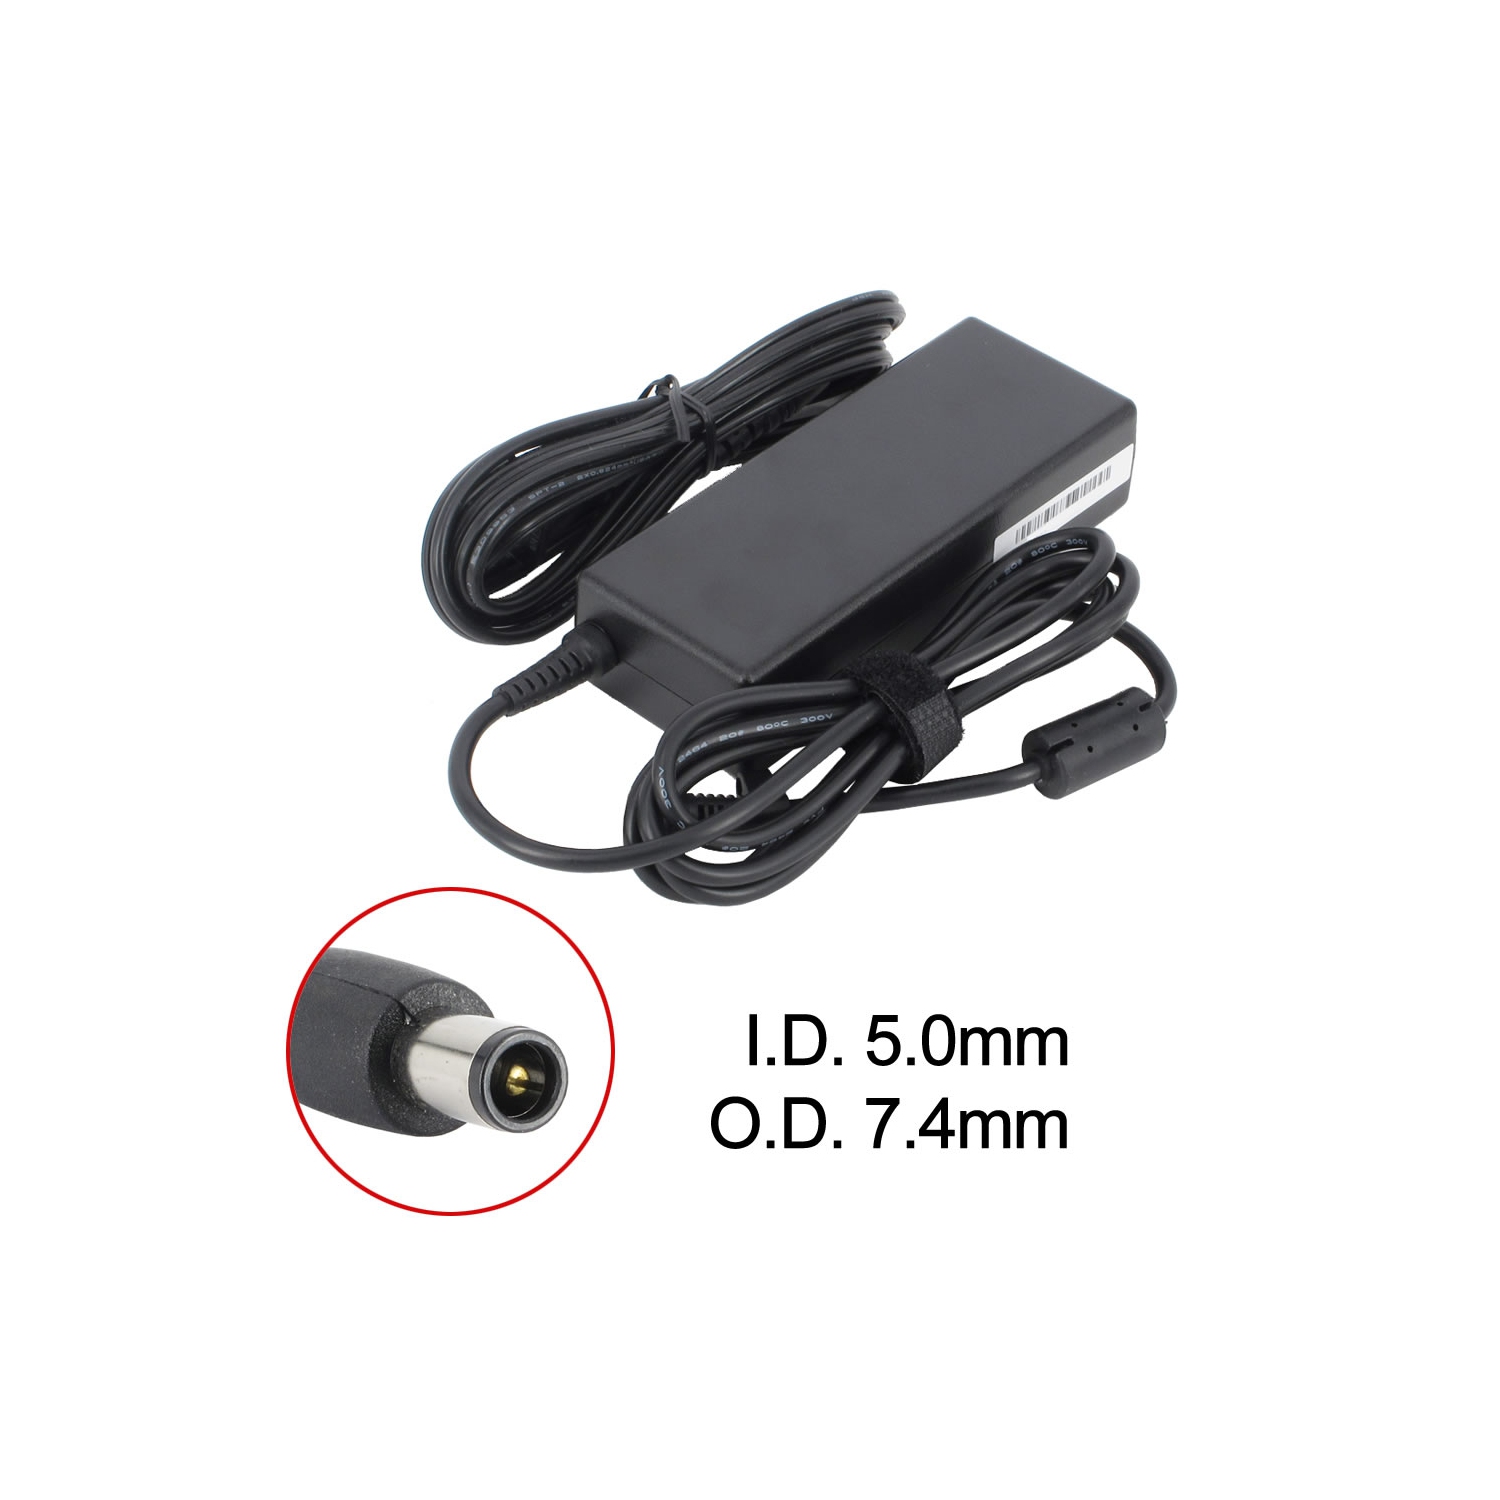 New Laptop AC Adapter for HP Pavilion dv4-4000, 384021-001, 453198-001, 519329-003, AD9043-021G2, KG298AA, PPP012S-S